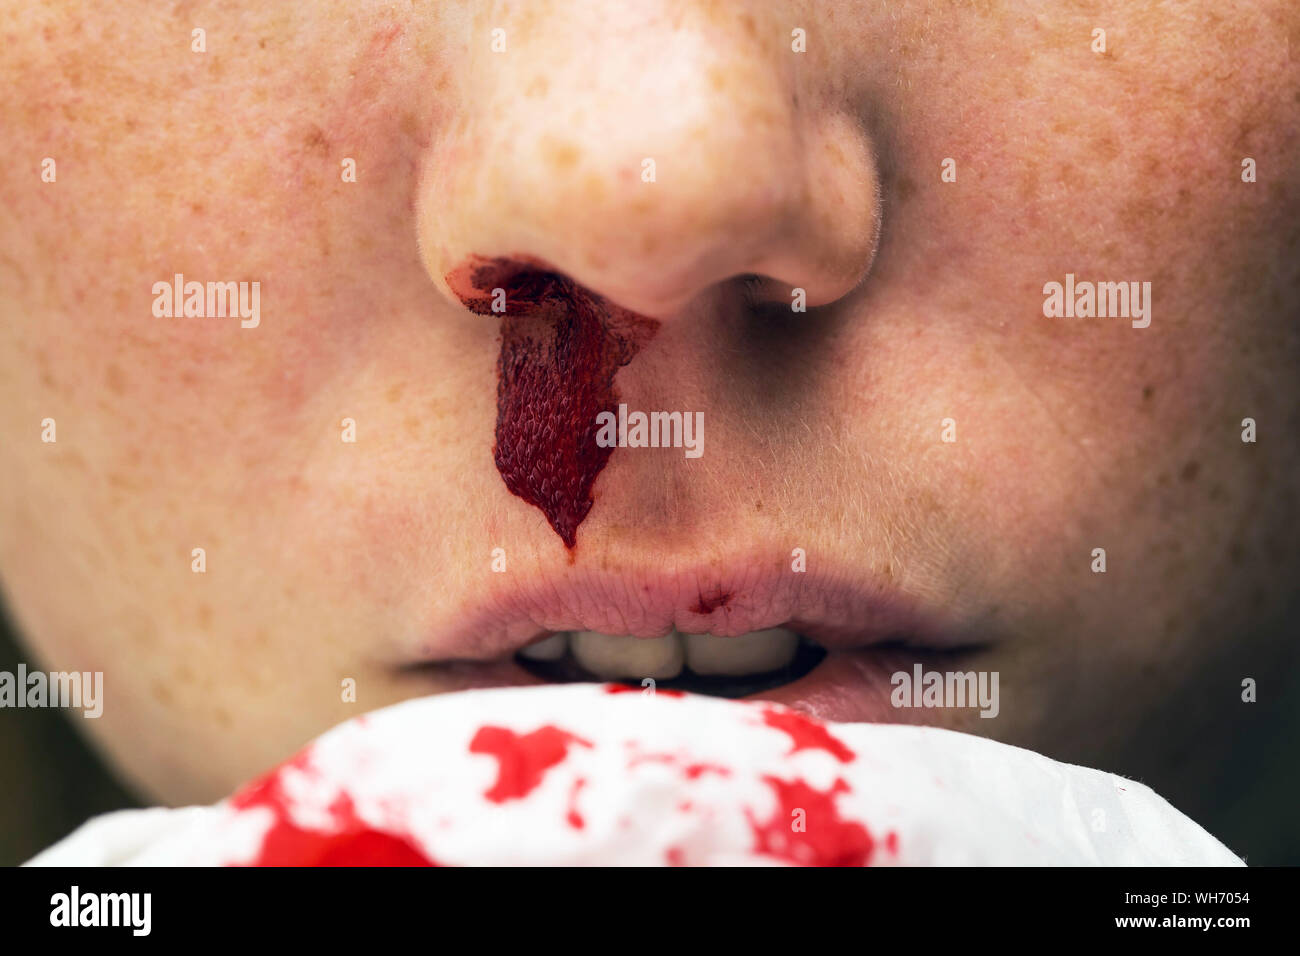 Wound nosebleed, woman bleeding from her nose, nose injury blood and tissue Stock Photo